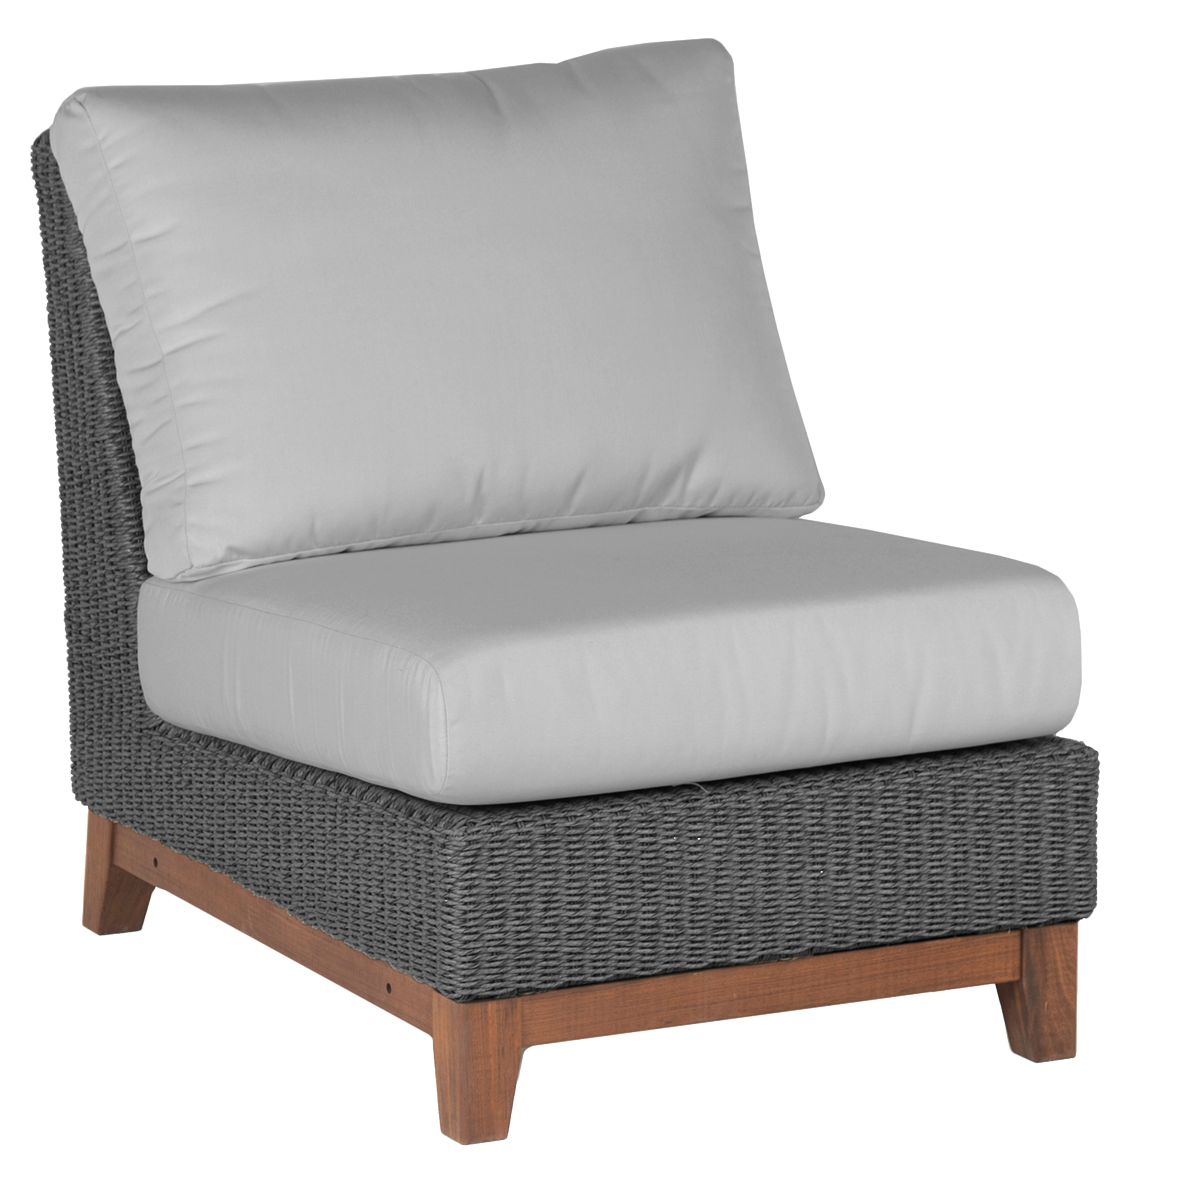 Coral Sectional Extension Lounge Chair